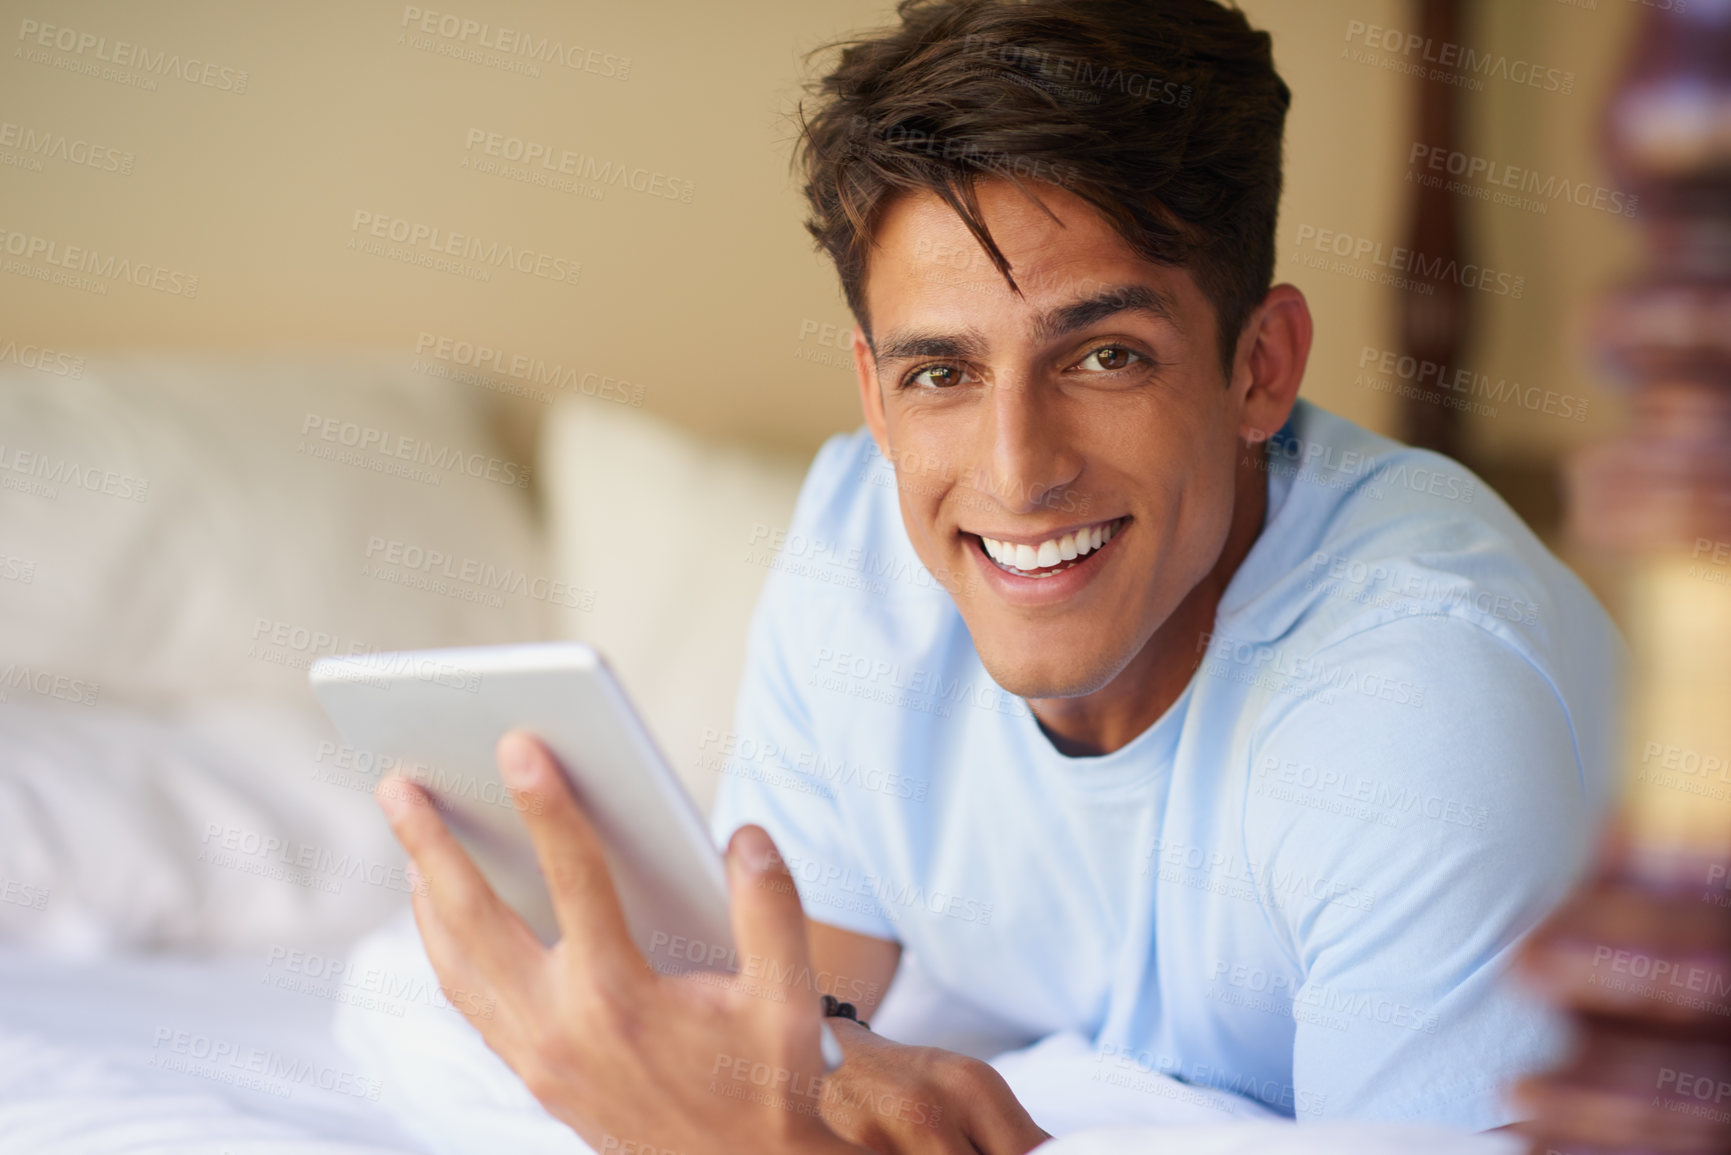 Buy stock photo Cropped shot of a handsome young man using his digital tablet at home